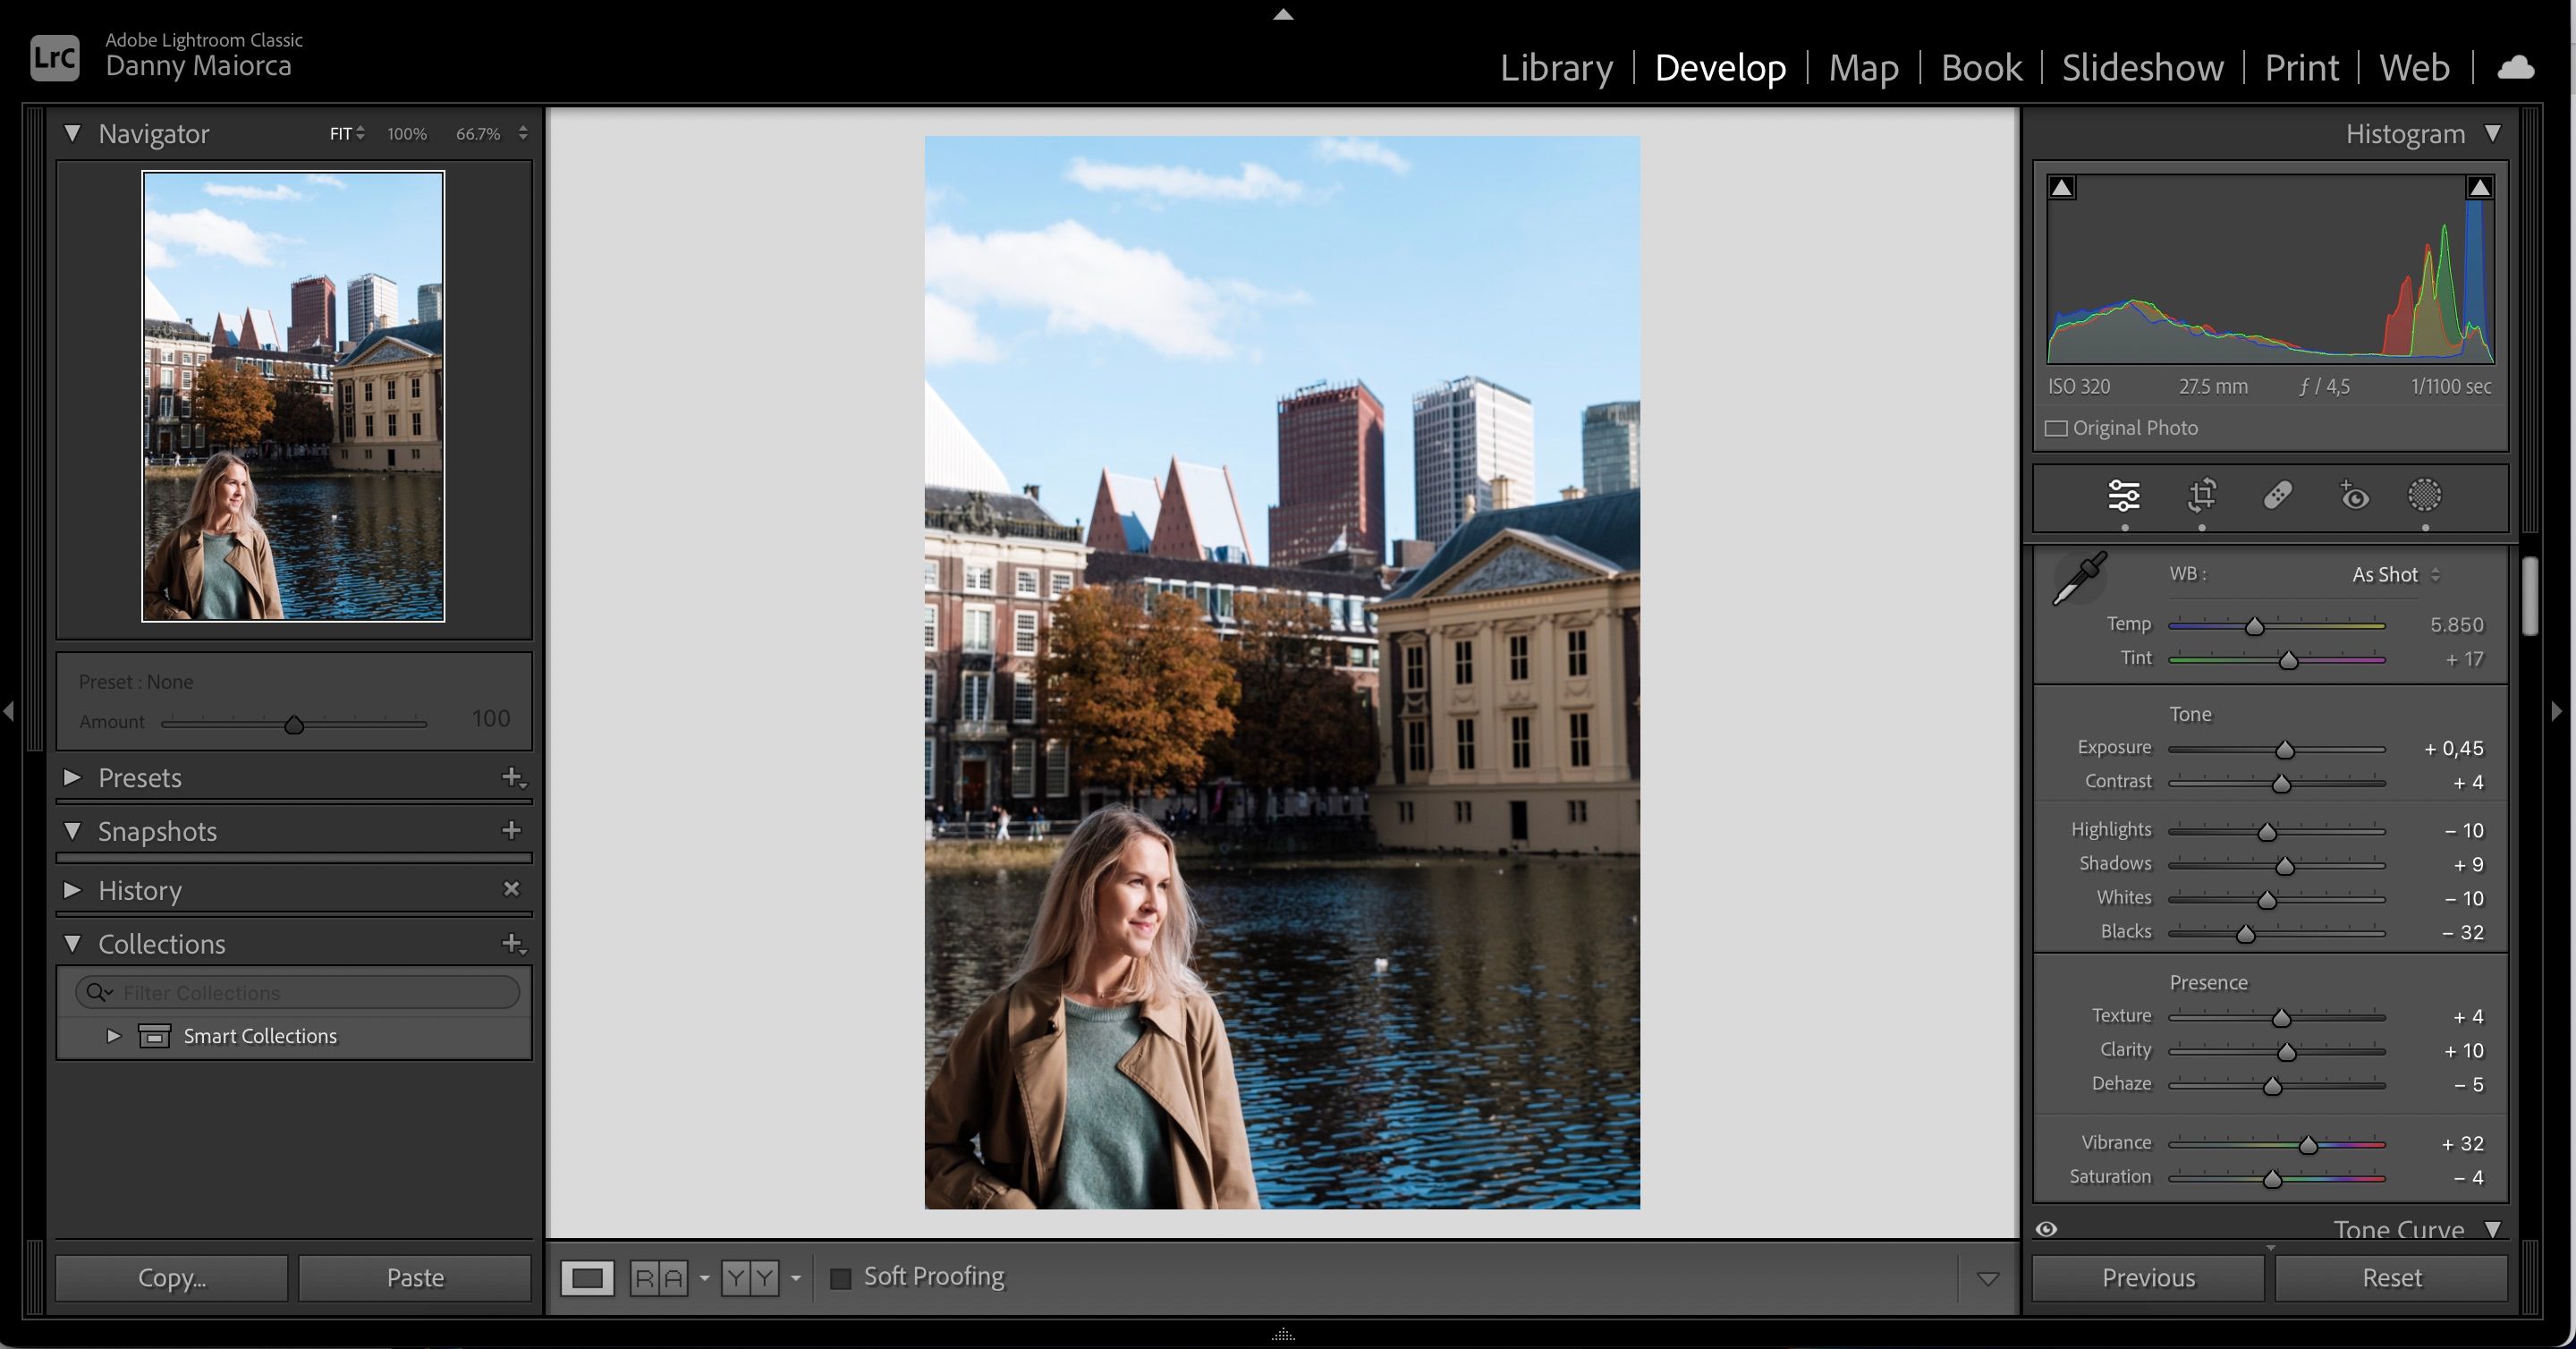 The Snapshots Tab in Lightroom Classic